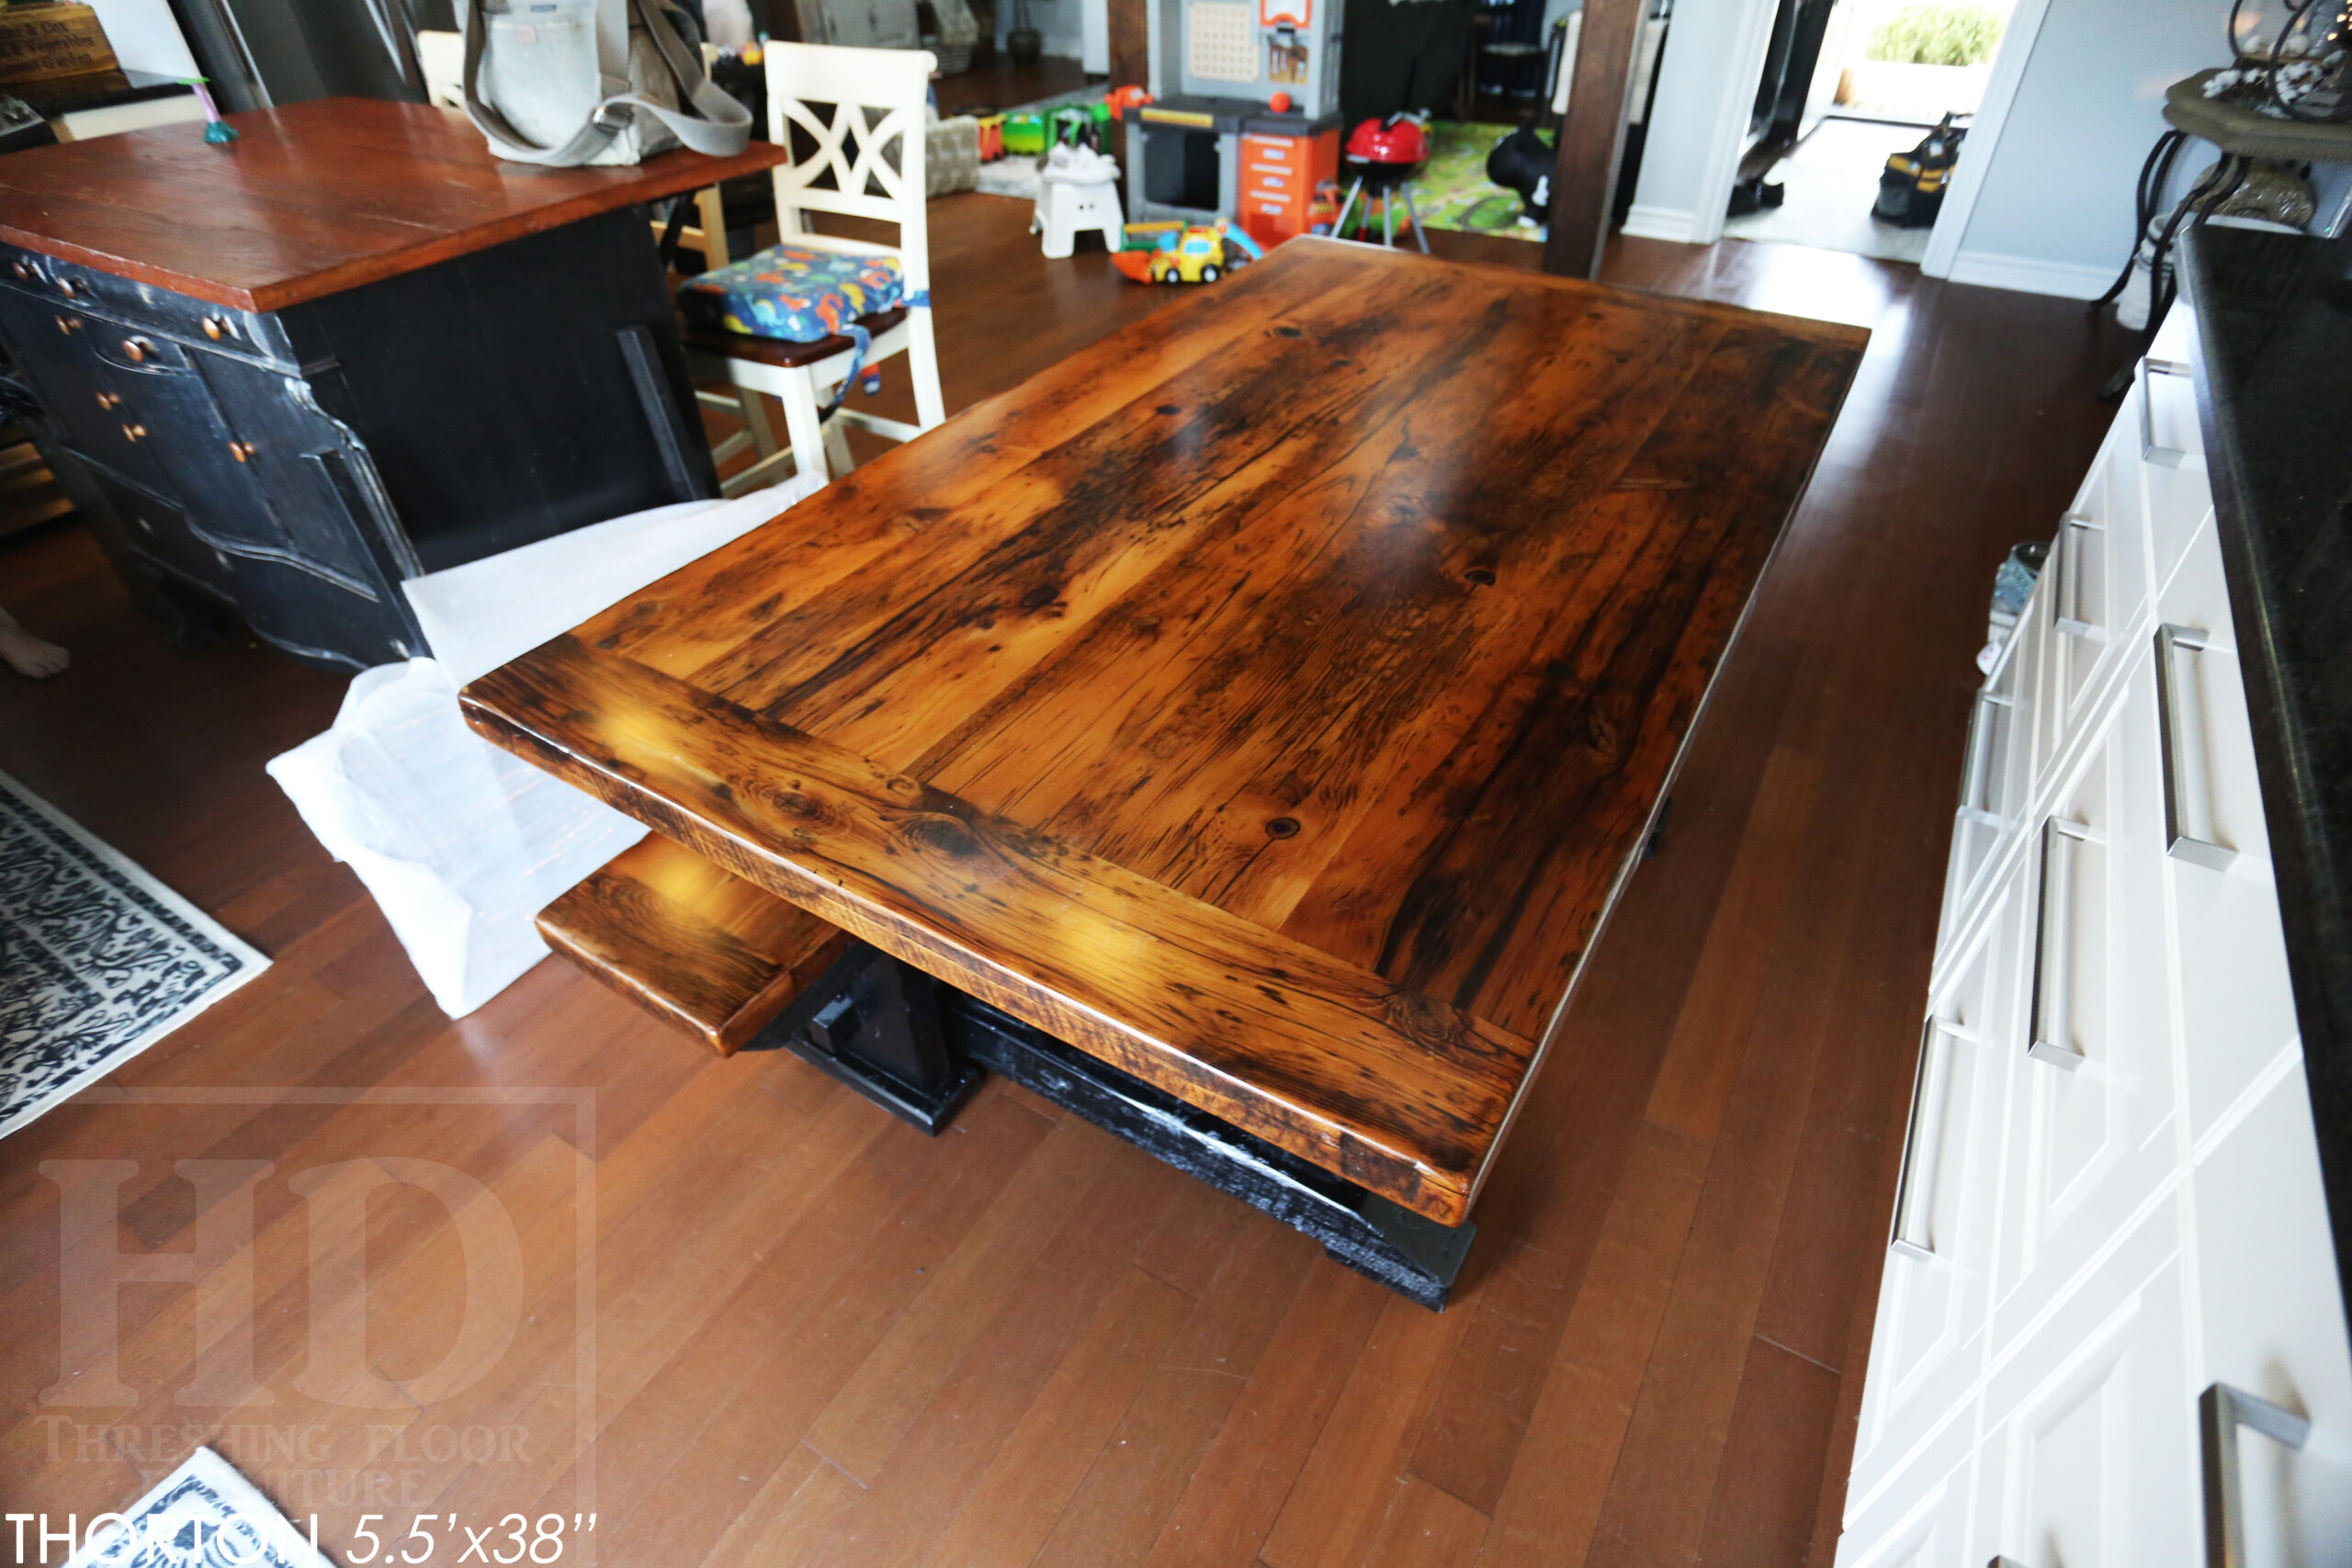 5.5' Reclaimed Wood Table we made for an Ontario home - 38" wide - Sawbuck Base / Painted Black - Old Growth Hemlock Threshing Floor Construction - Original edges & distressing maintained - Premium epoxy + satin polyurethane finish - 5' Trestle Bench - www.table.ca